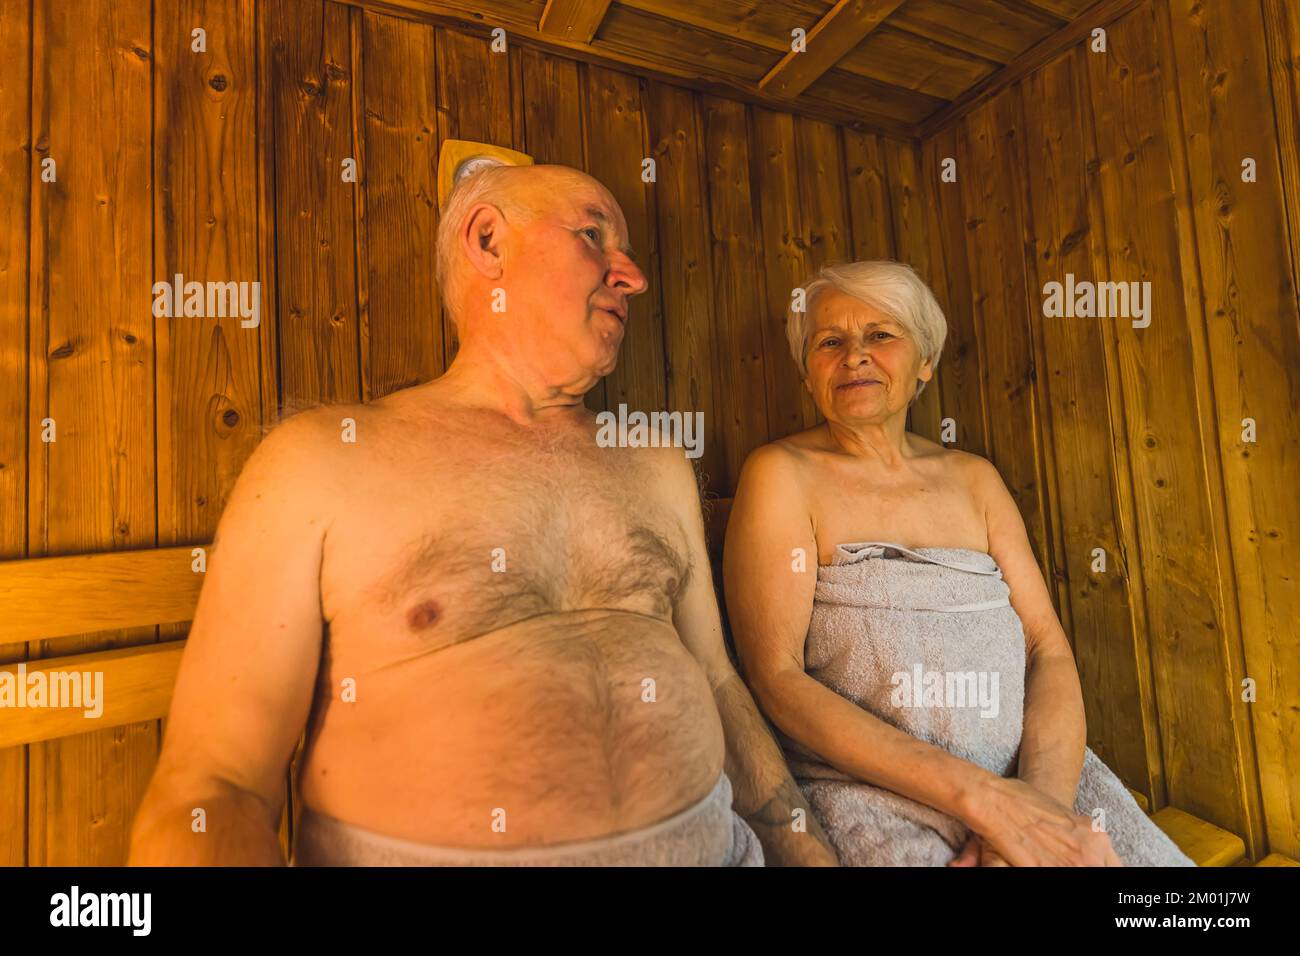 Idea for a gift for grandparents. Sauna and SPA day. Indoor medium closeup shot of two caucasian senior adults sitting together in a sauna,. High quality photo Stock Photo